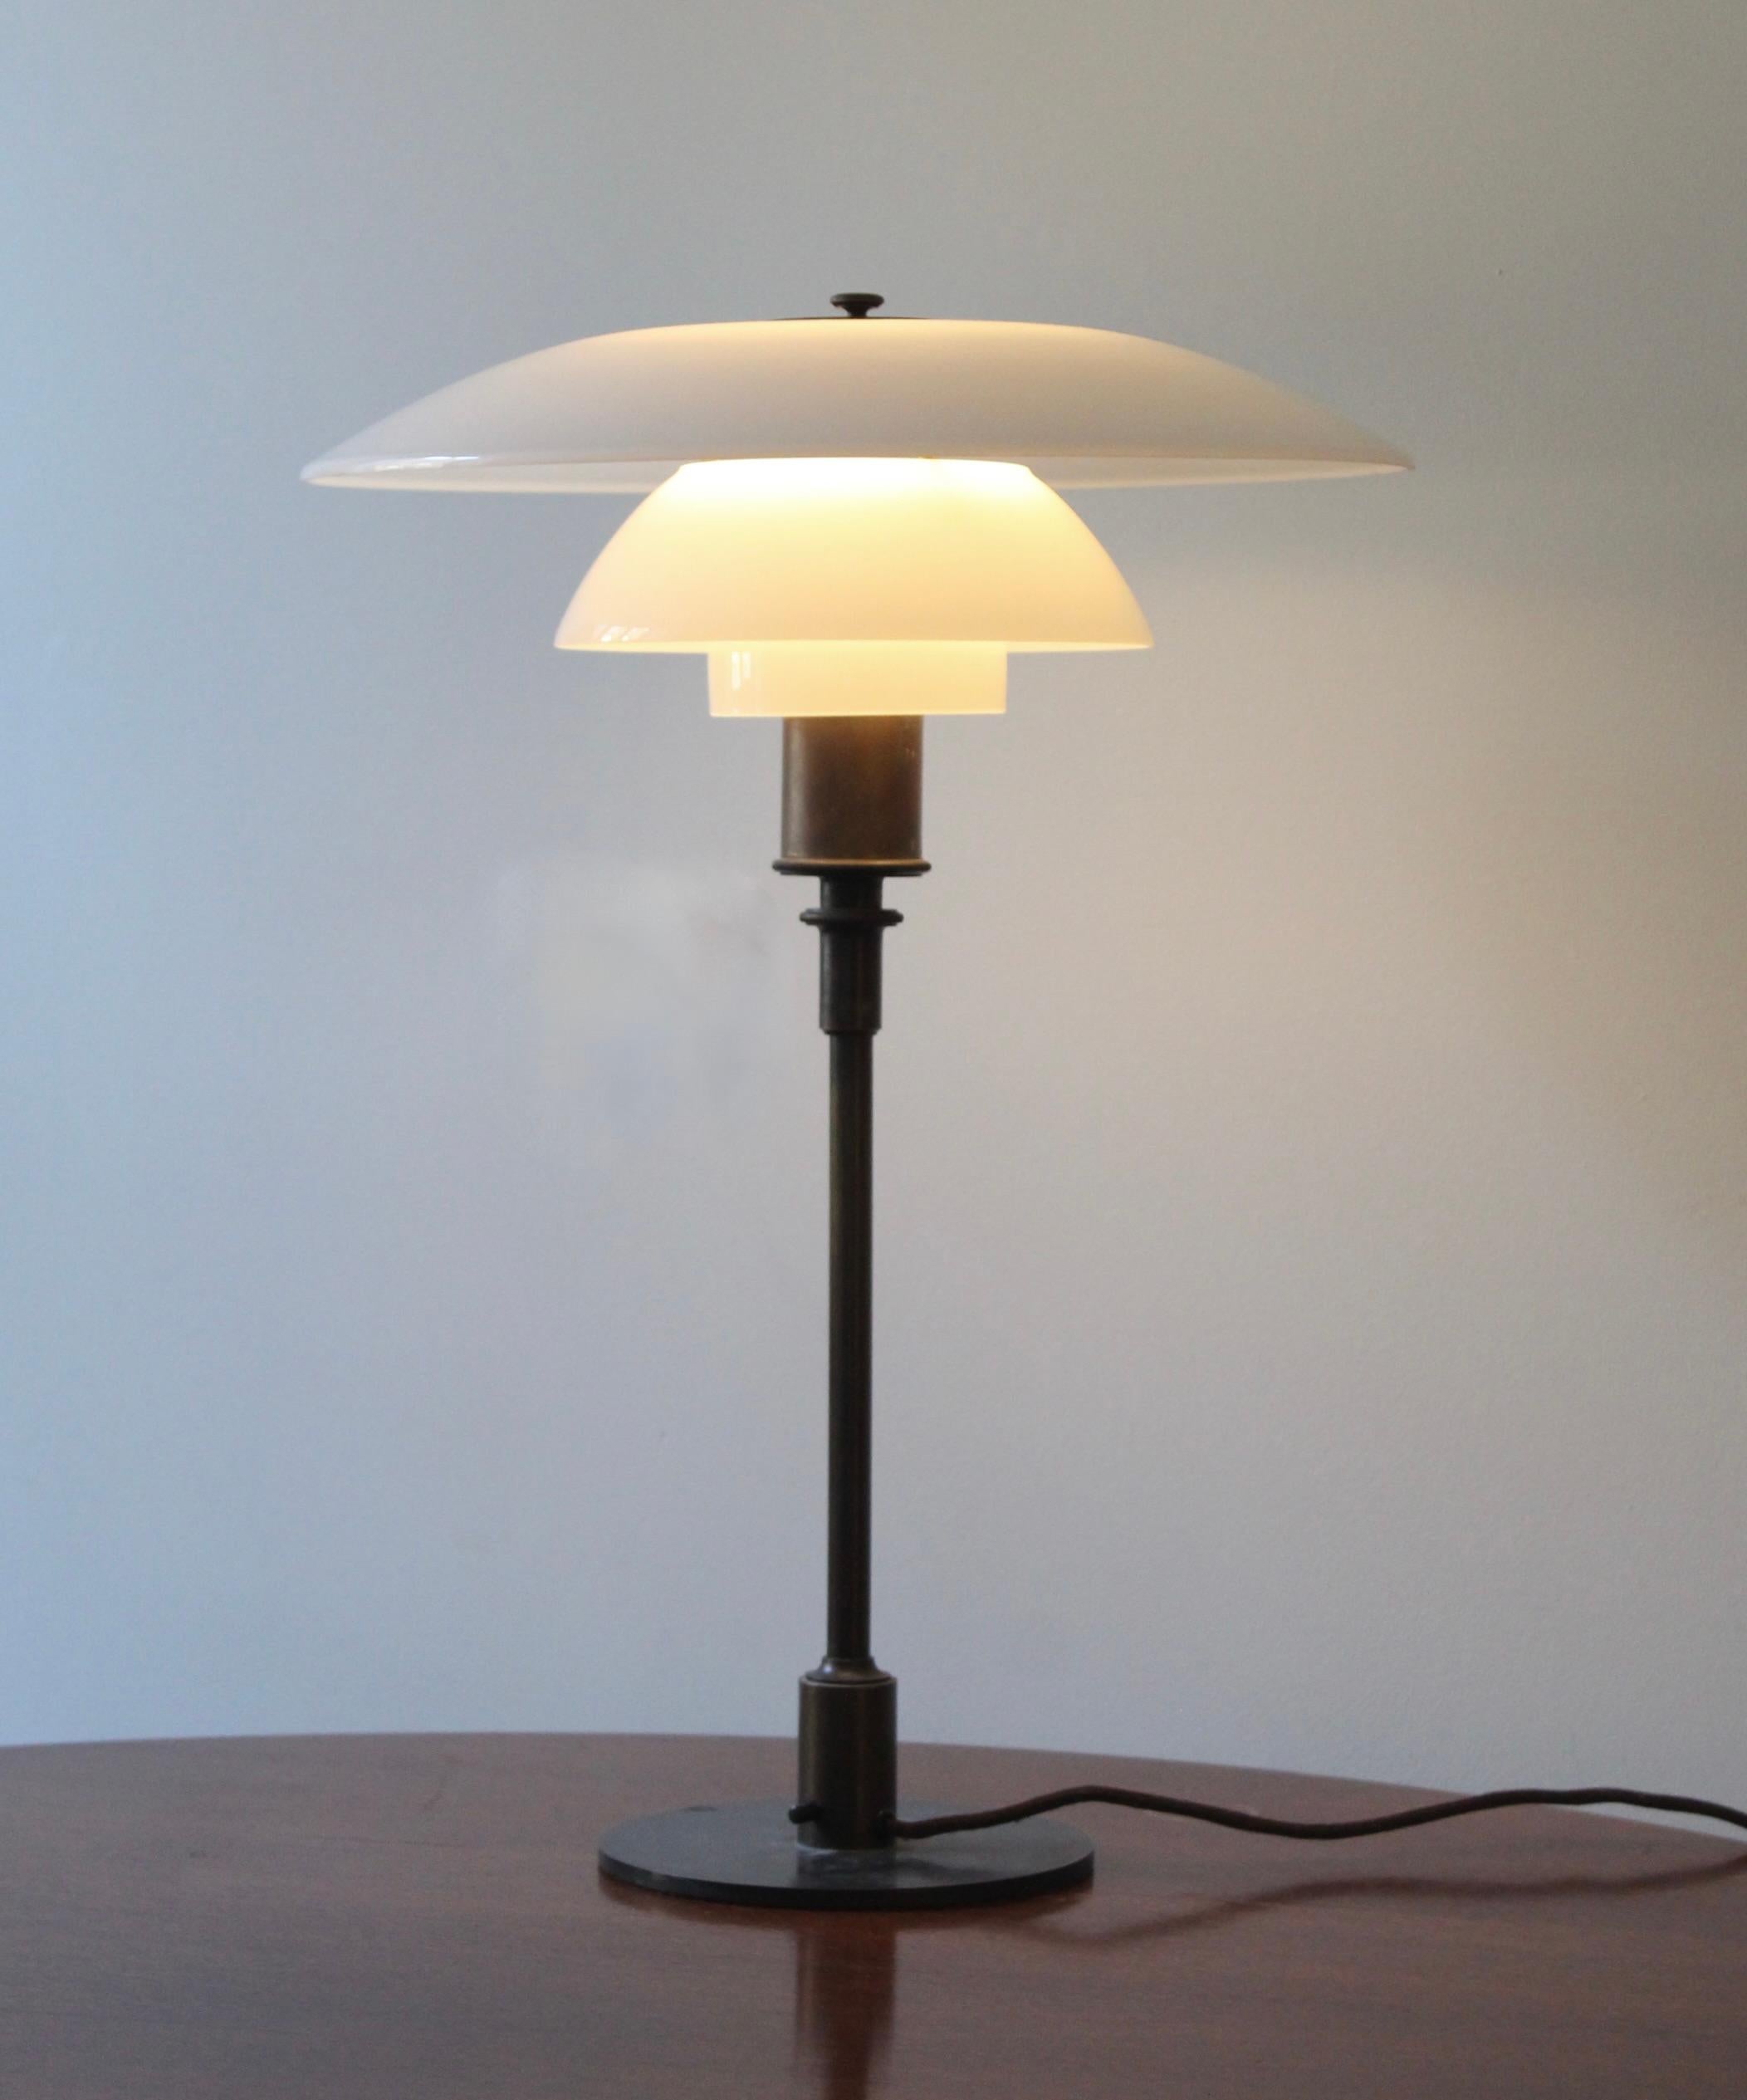 An early production example of Poul Henningsen iconic 4/3 table lamp, produced by Louis Poulsen, Denmark, c. 1927.